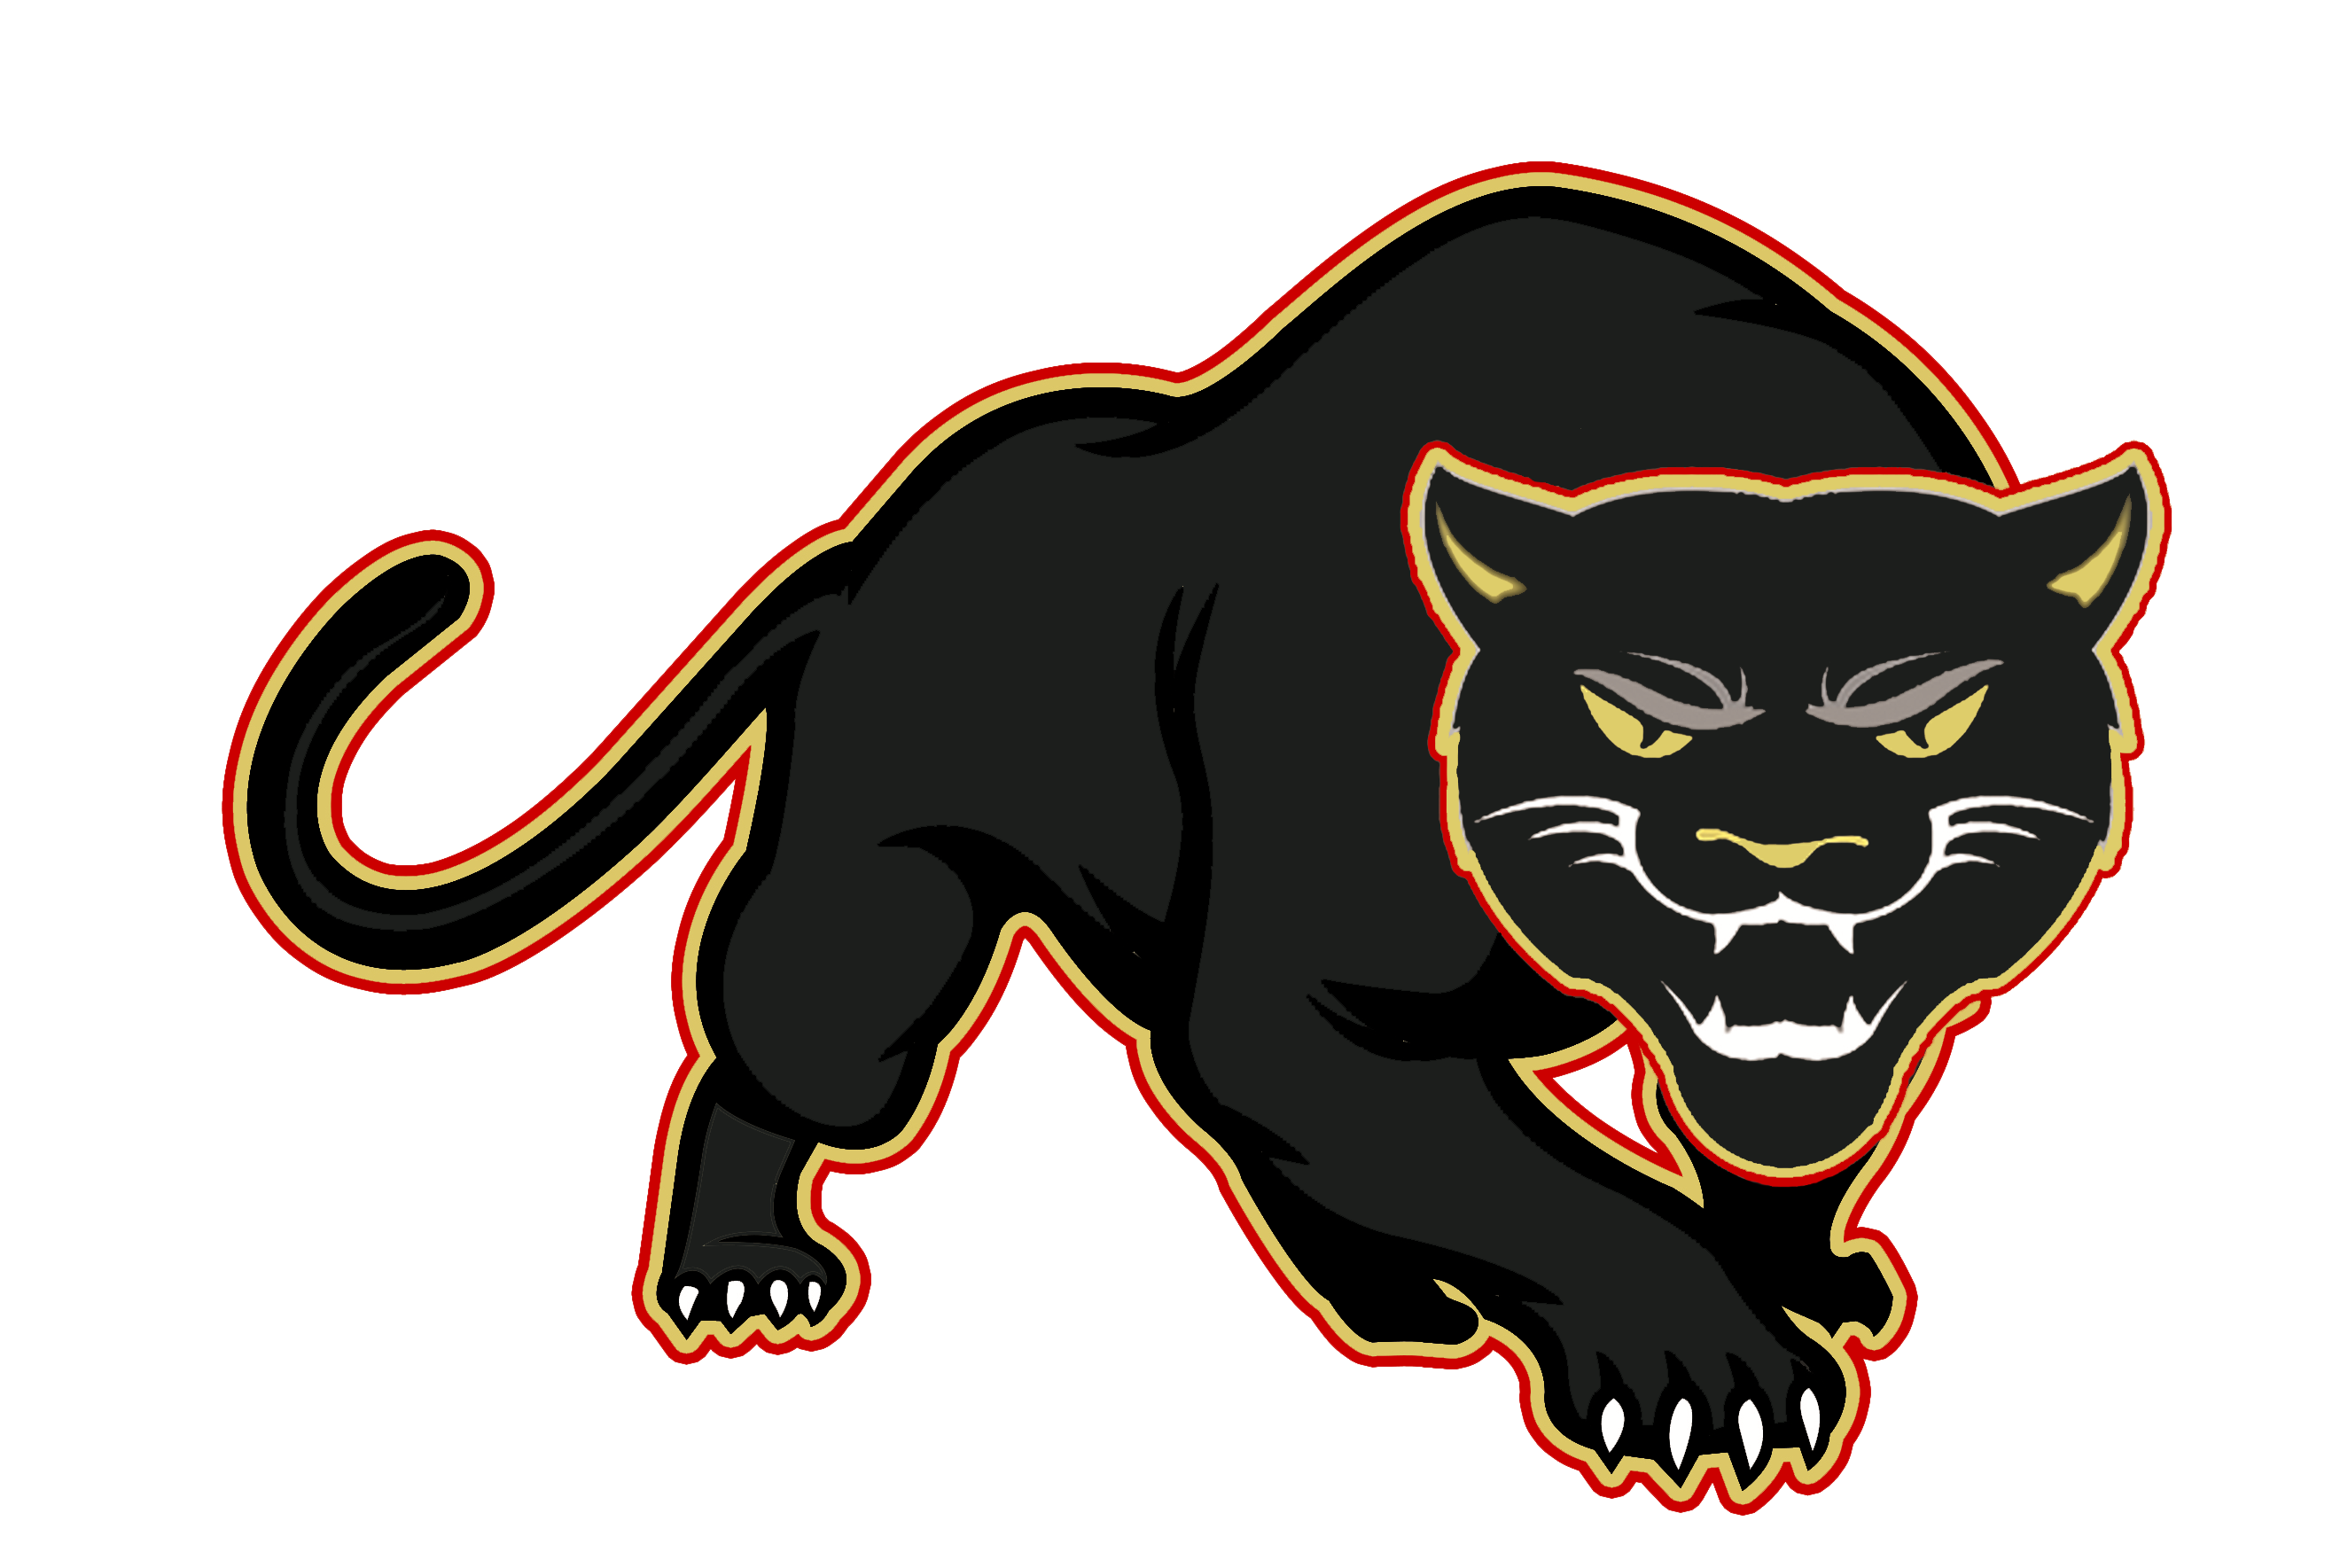 Panther Clipart Roar Panther Roar Transparent Free For Download On